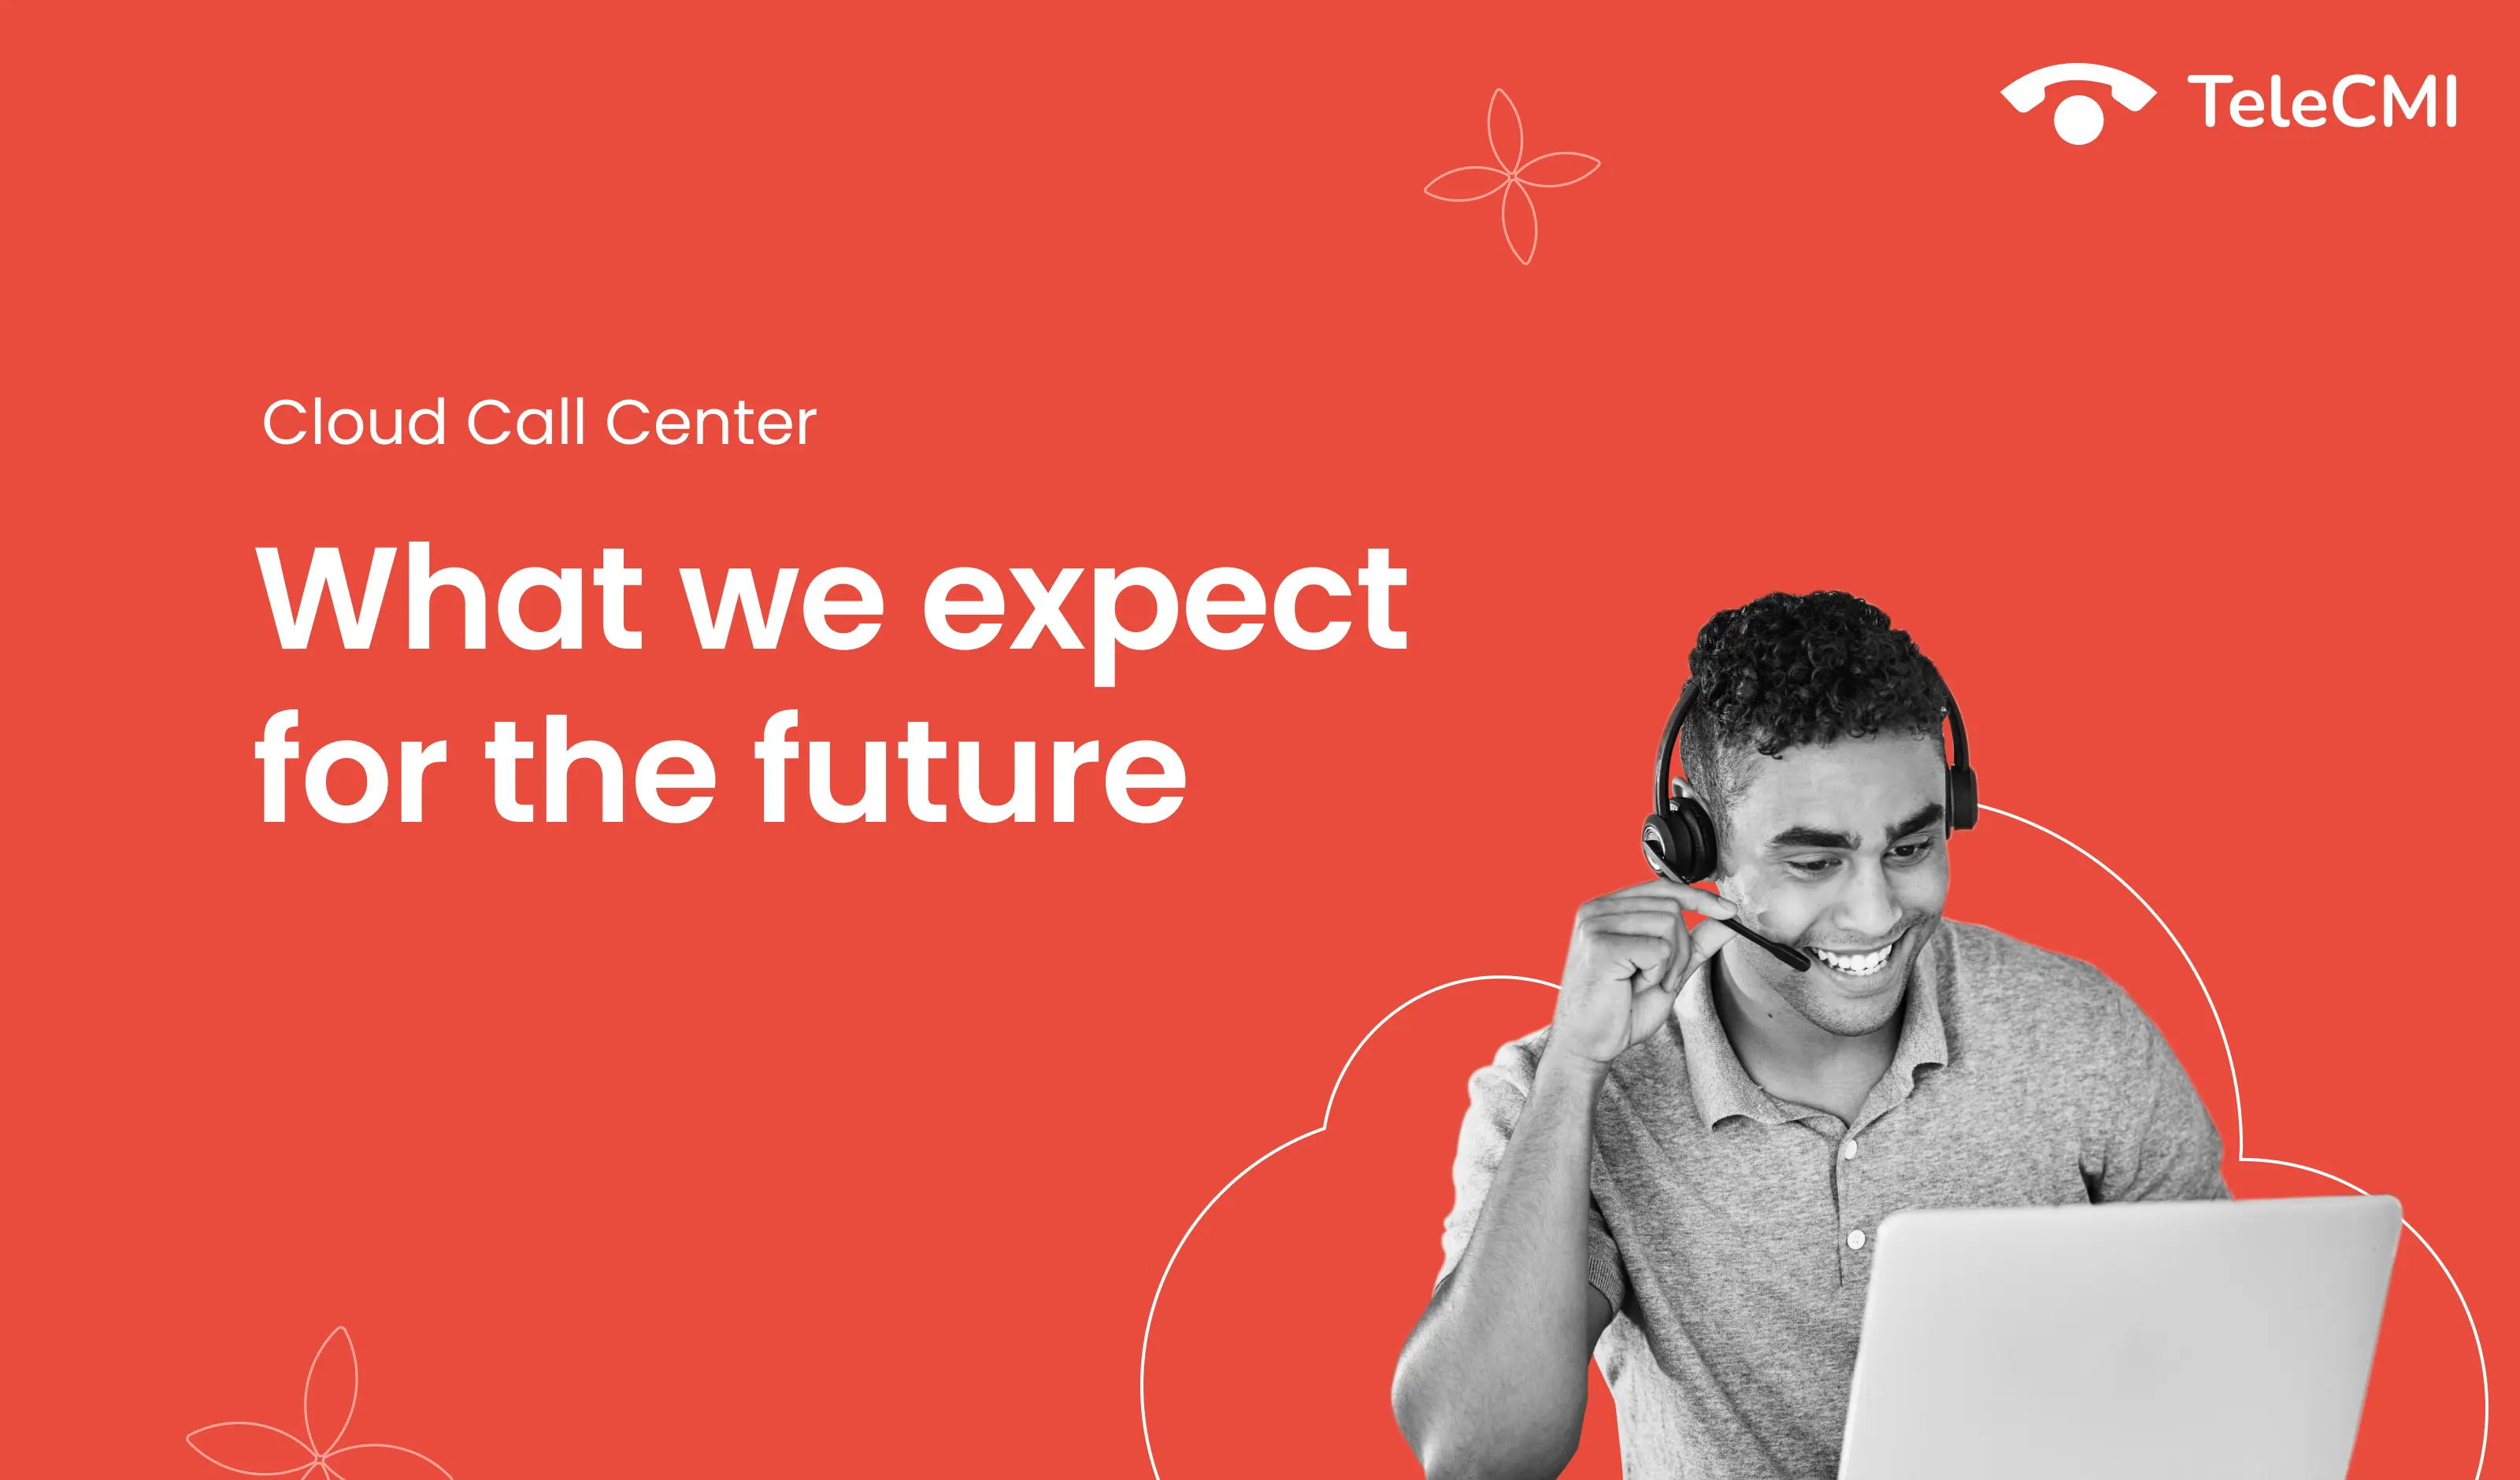 Cloud Call Center: What we can expect for the future